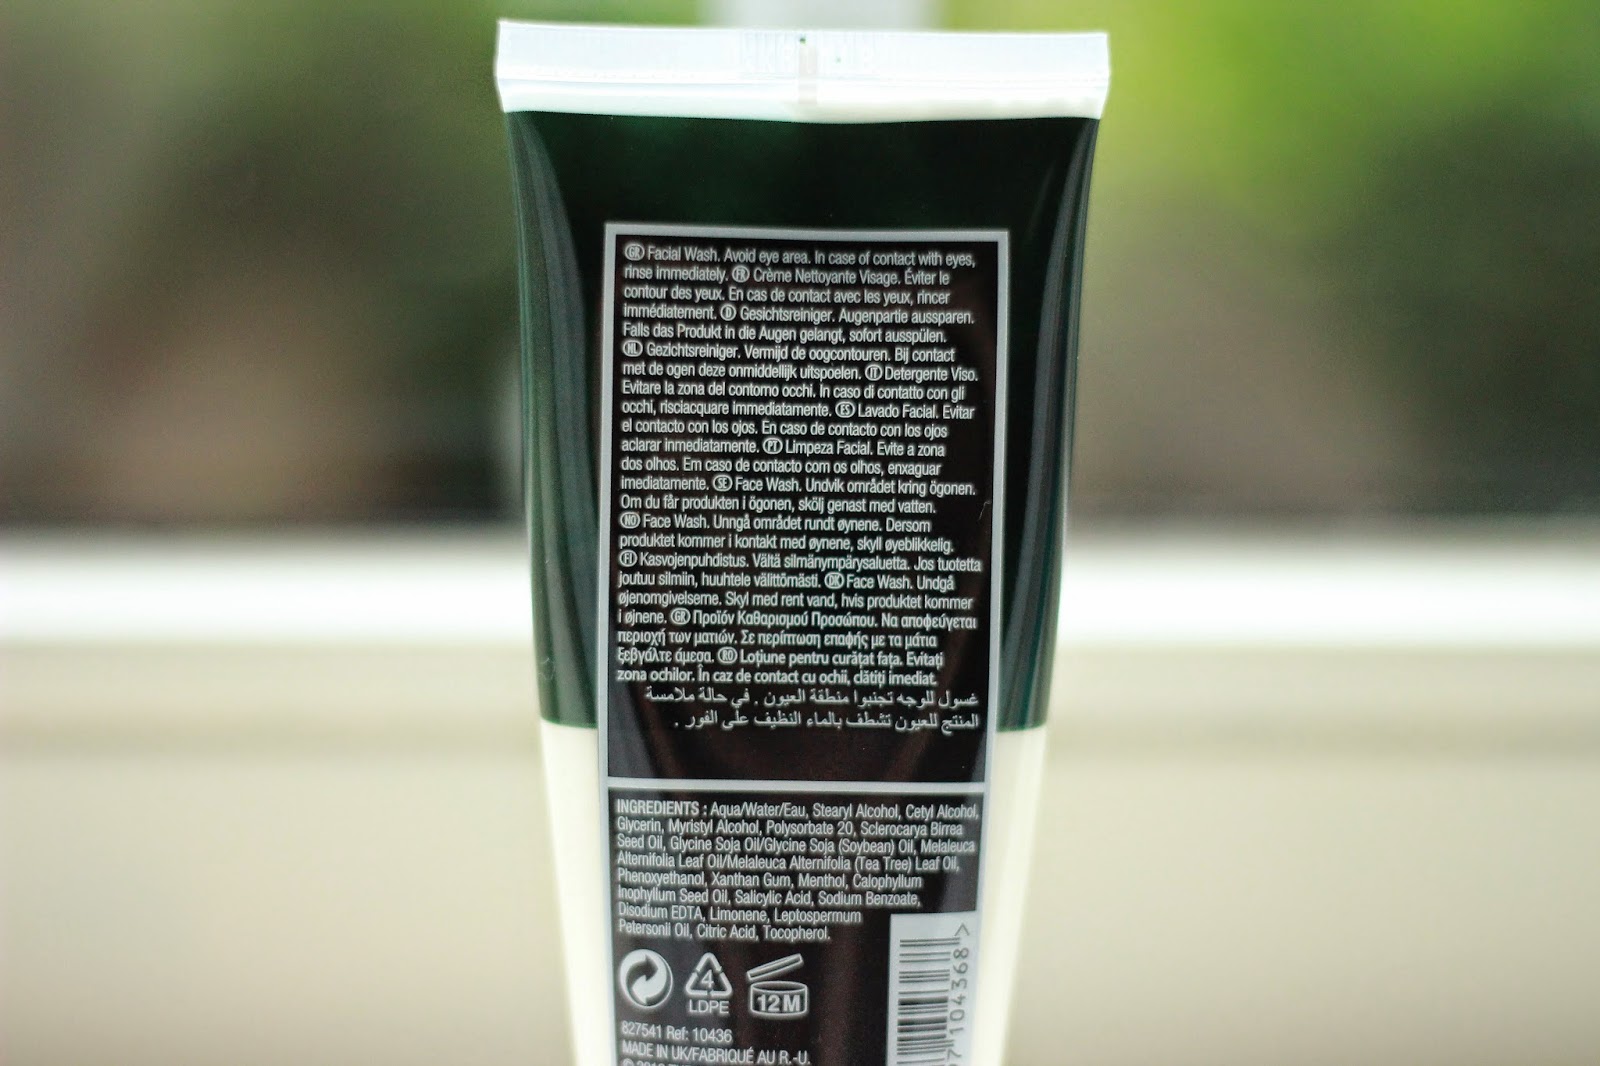 review ervaring the body shop tea tree cool & creamy wash